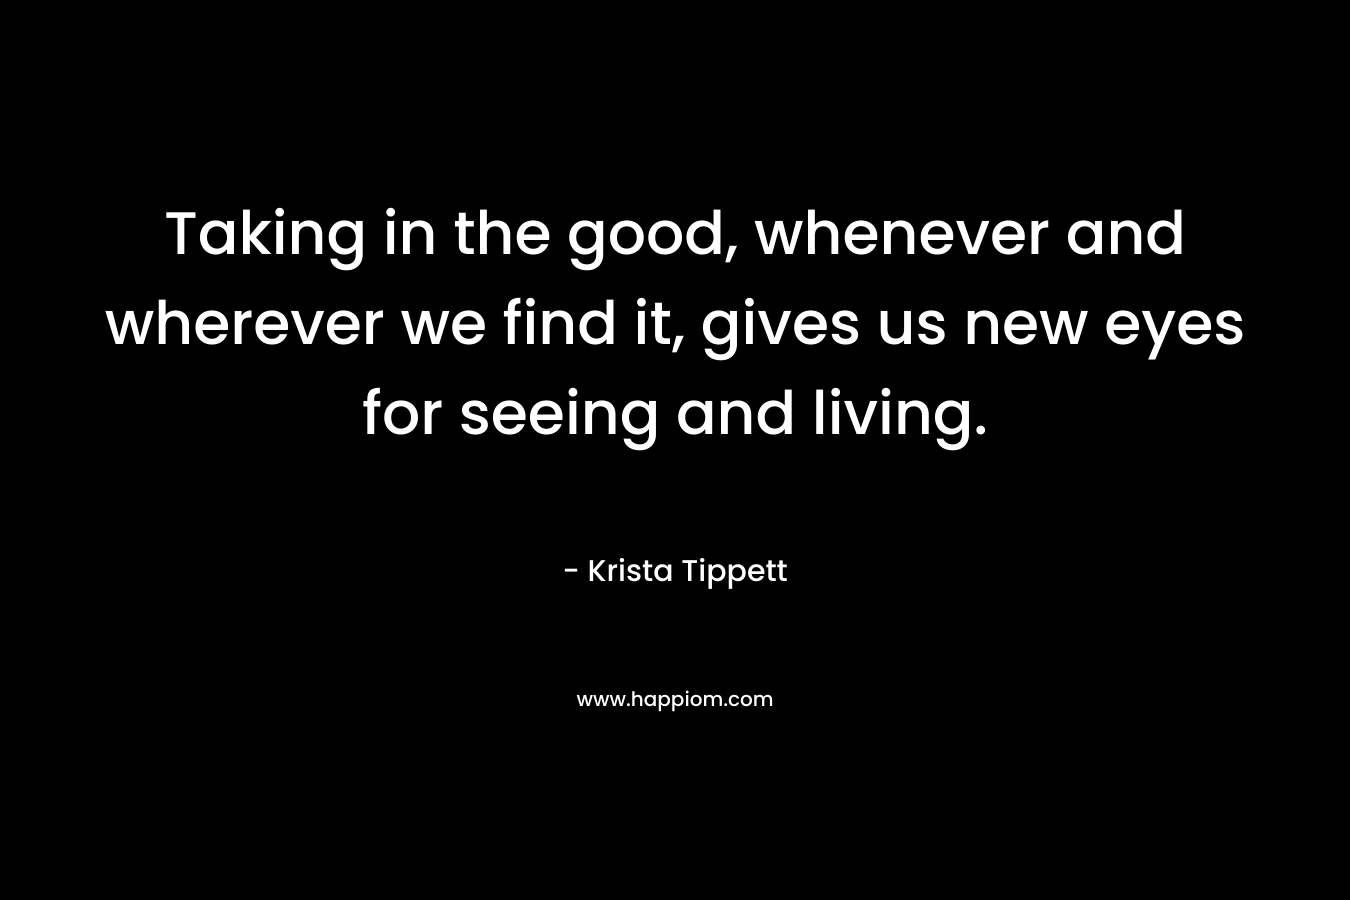 Taking in the good, whenever and wherever we find it, gives us new eyes for seeing and living. – Krista Tippett